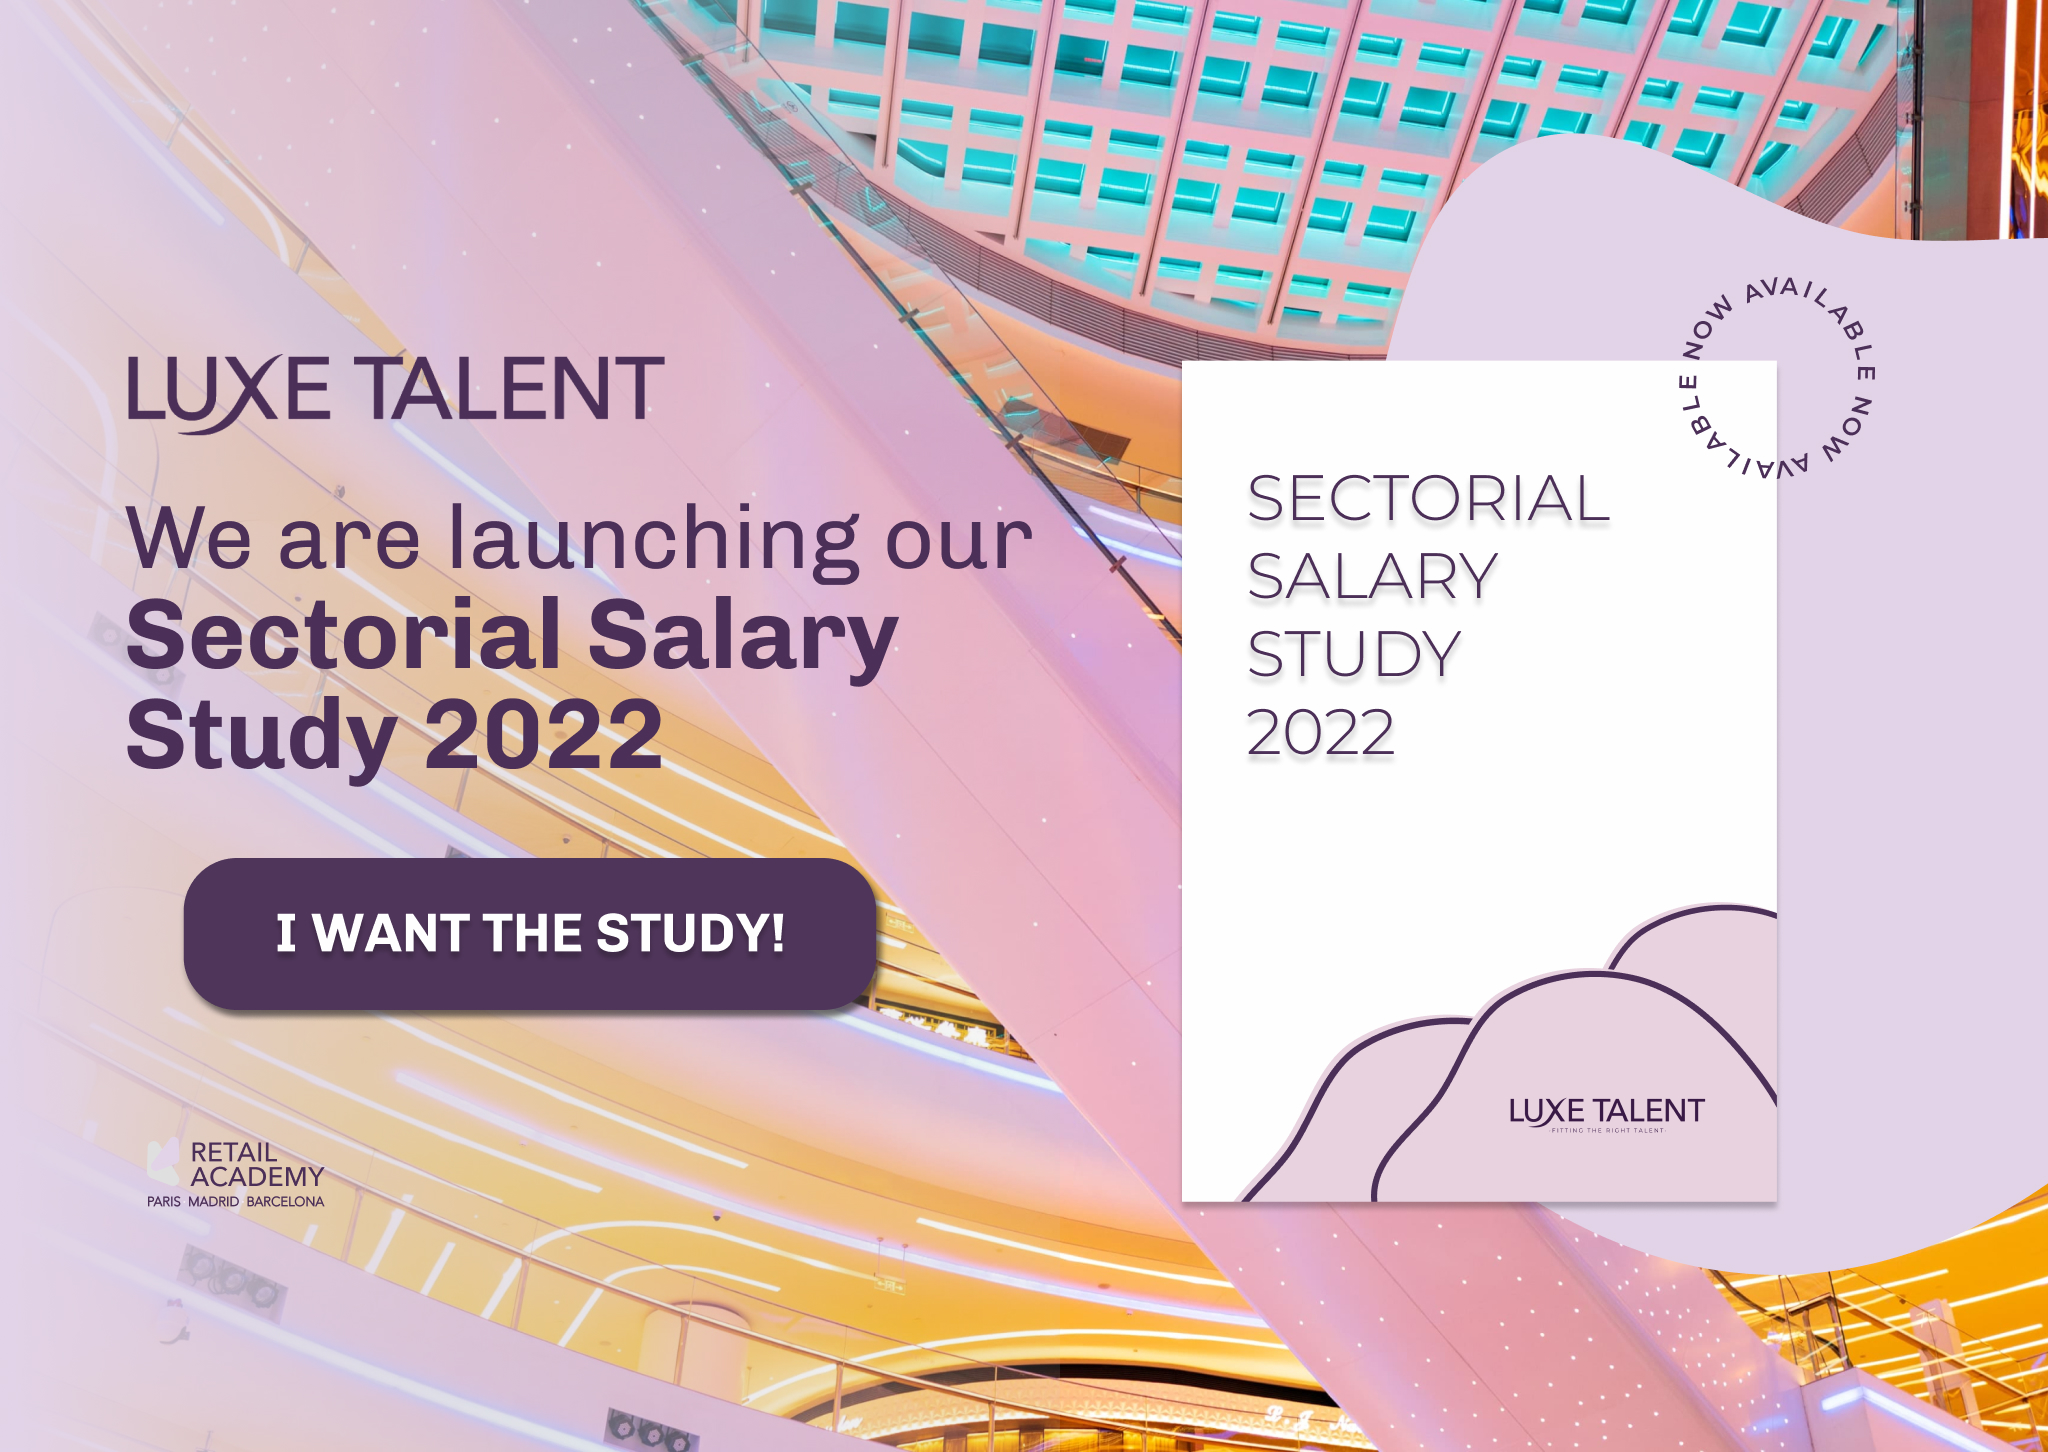 We are launching European Sectorial Salary Study 2022 by Luxe Talent, International Recruitment & Training Consultancy